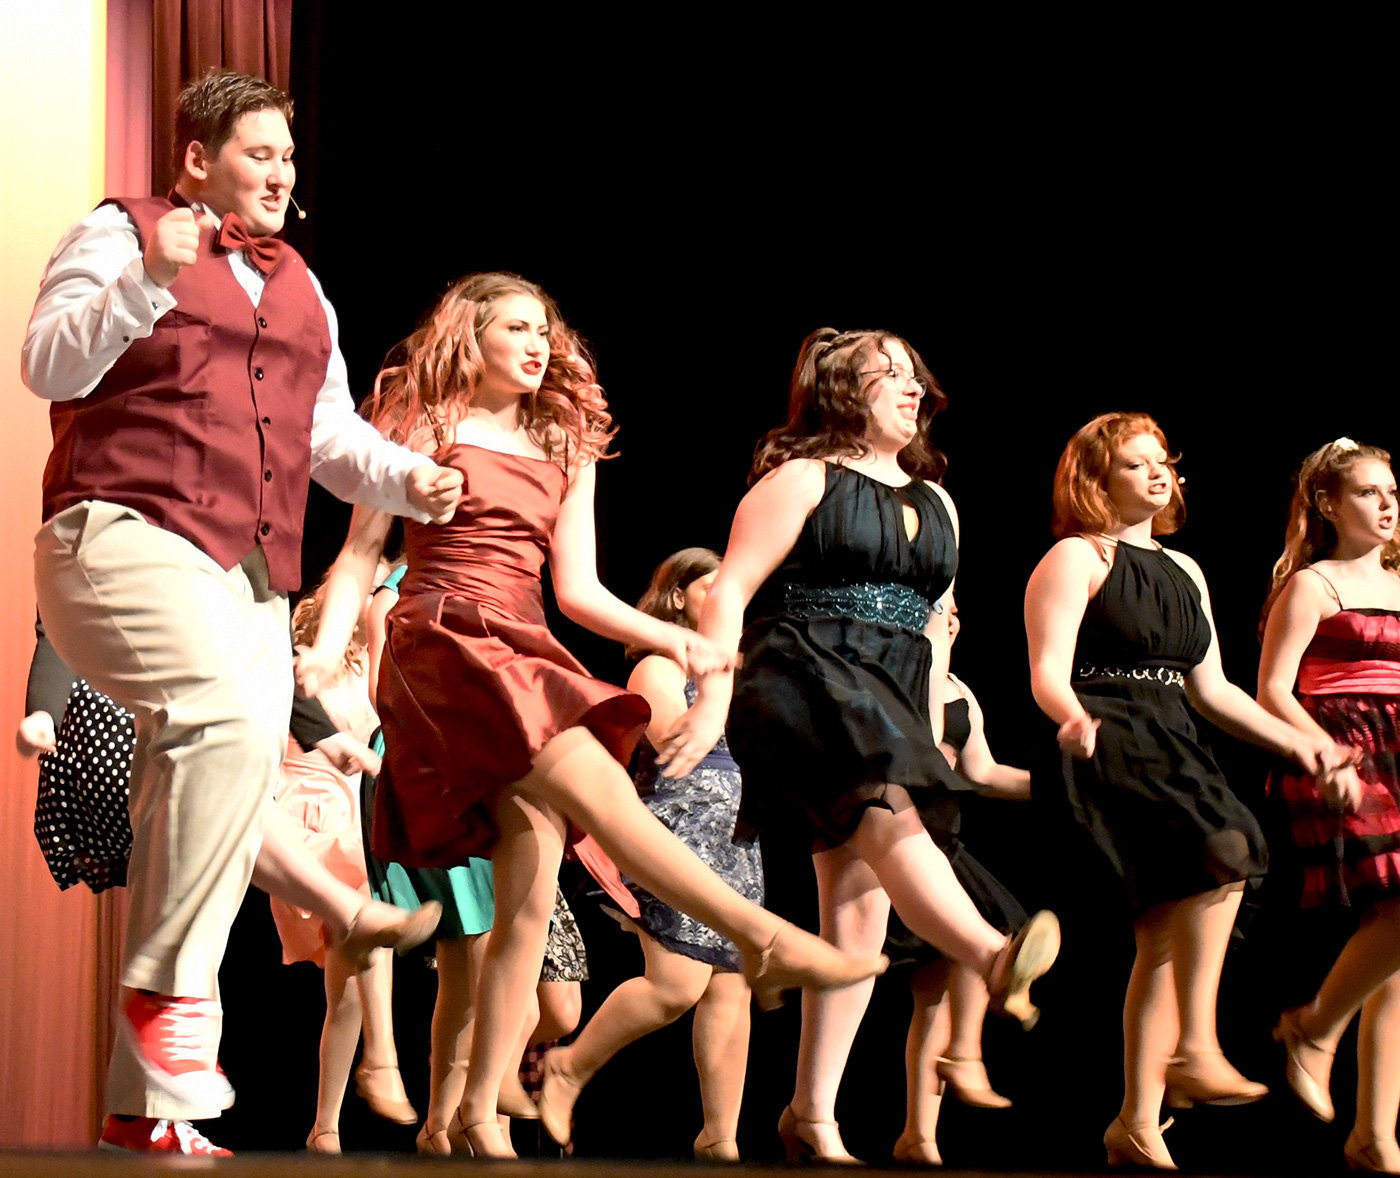 The cast danced for joy in the finale of Severna Park High School’s version of “Footloose” on November 3.